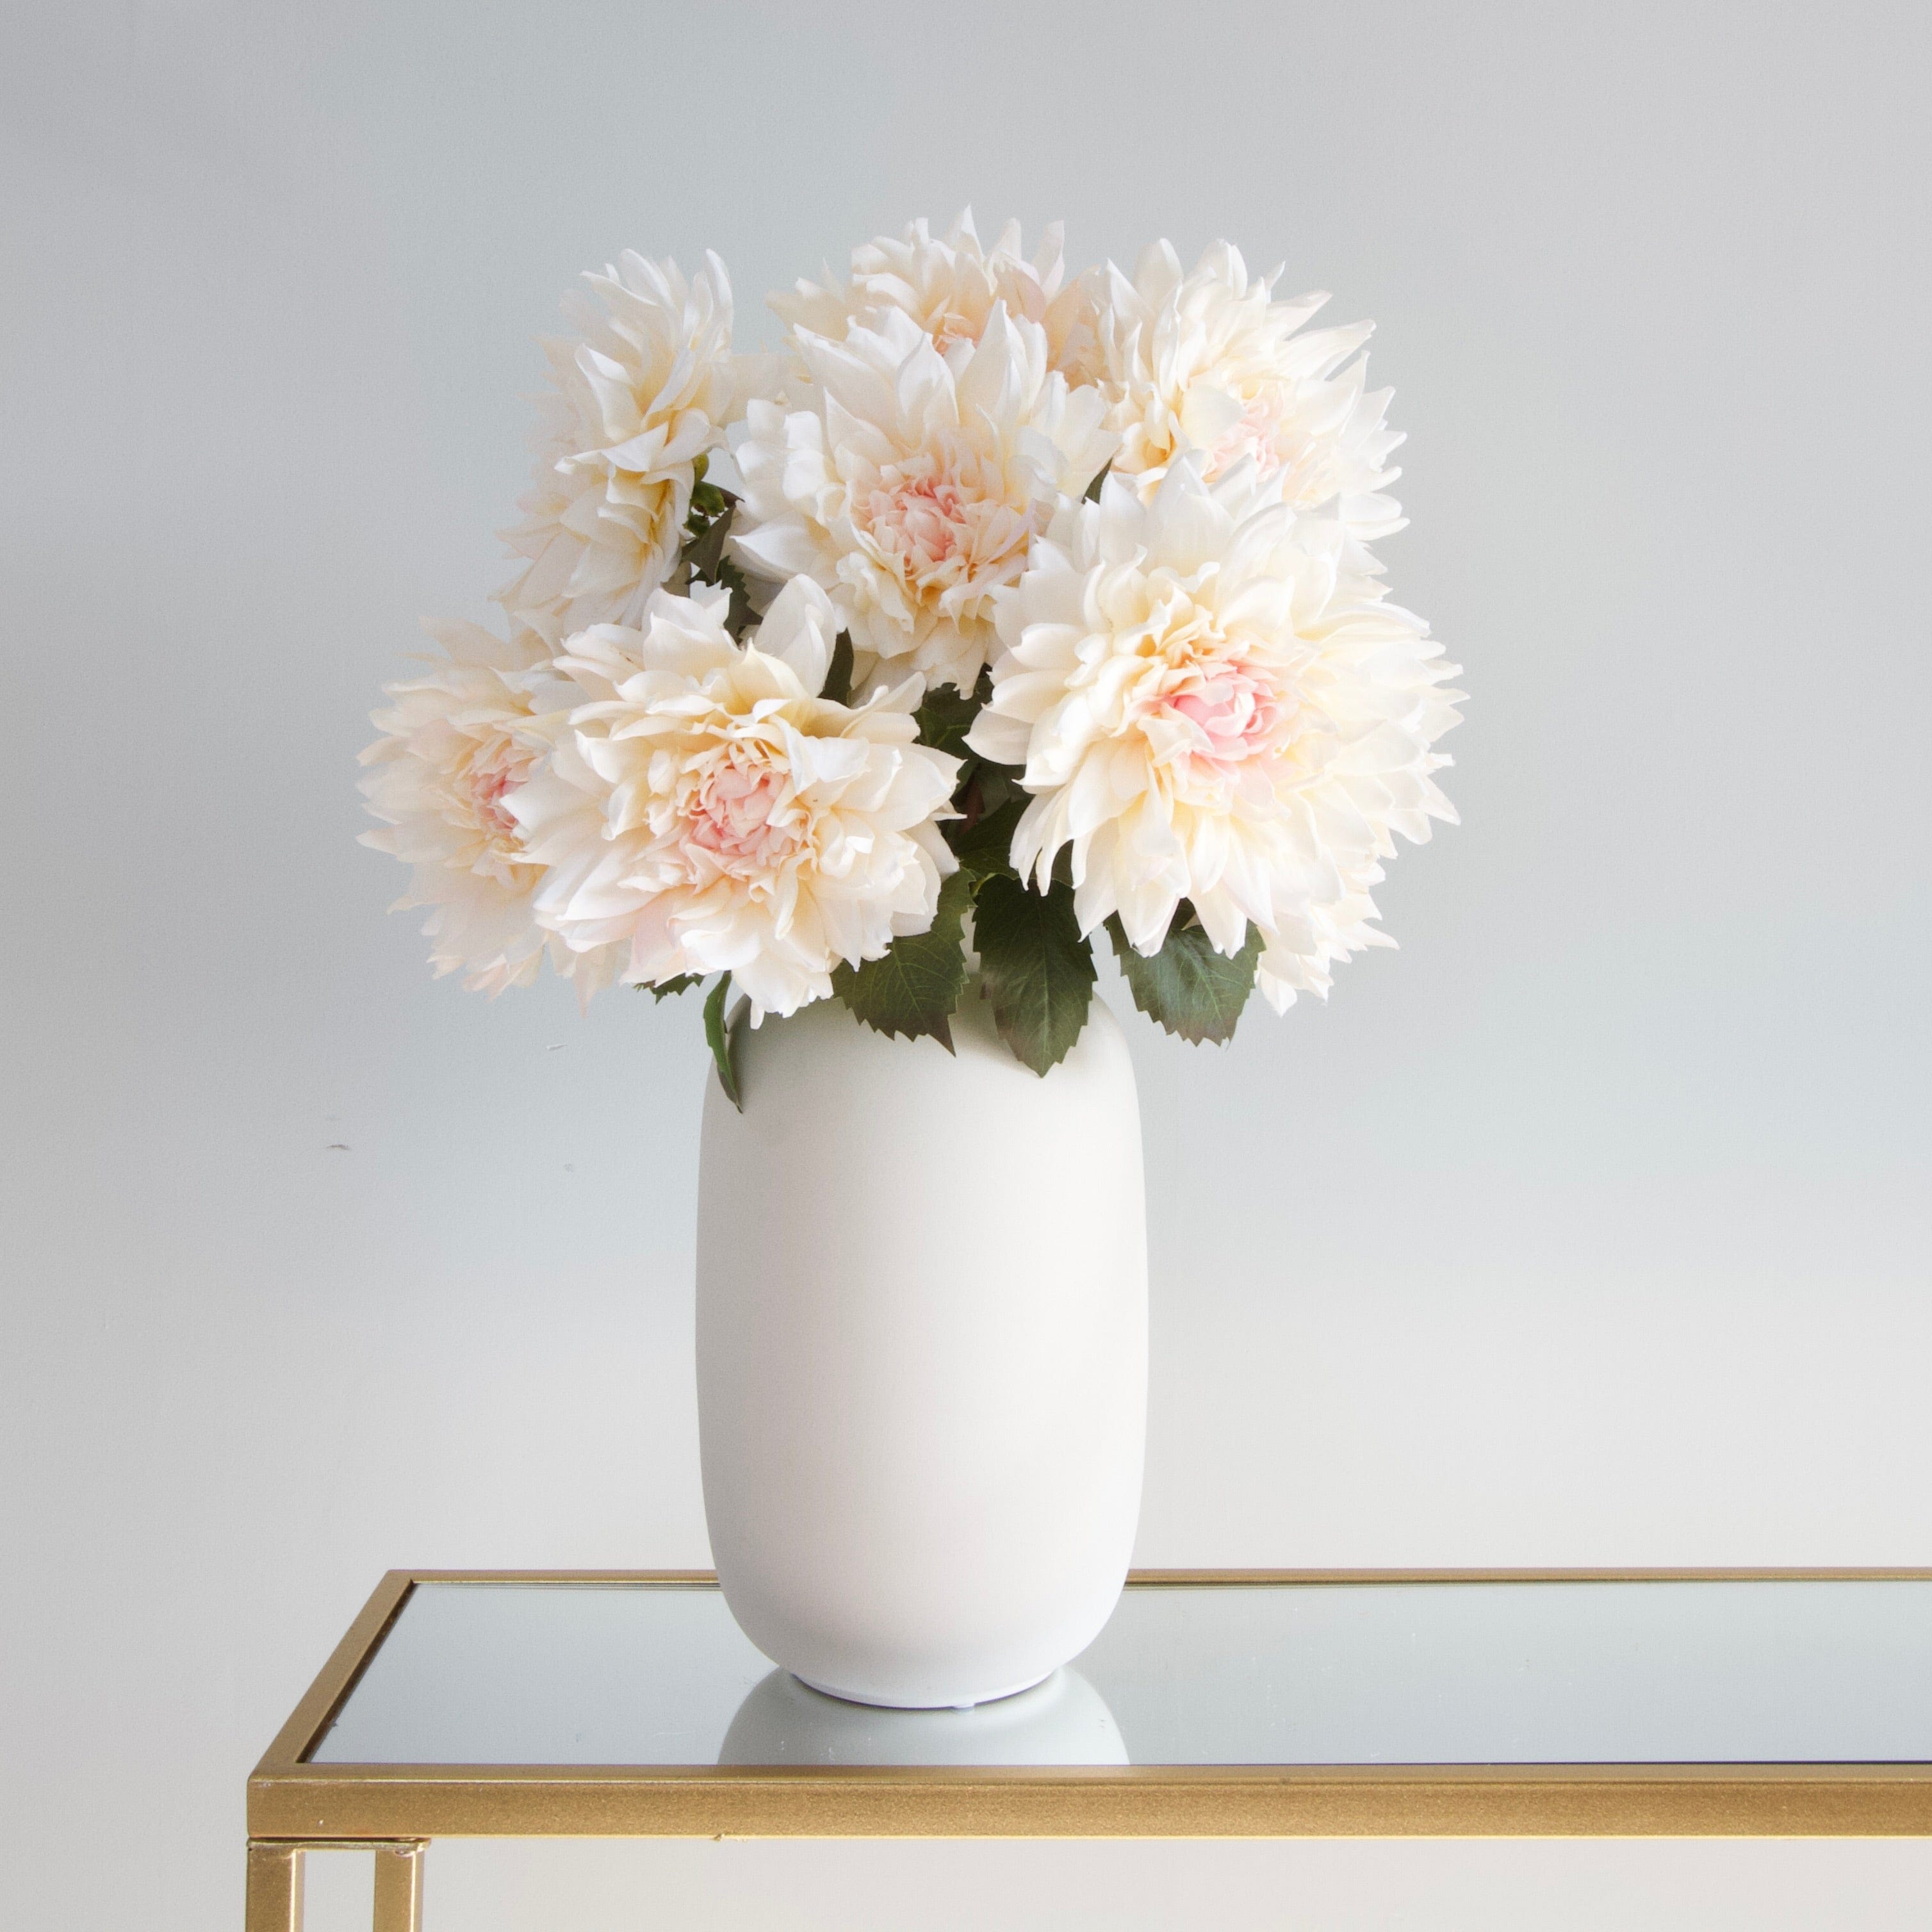 Luxury Lifelike Realistic Artificial Fabric Silk Blooms with Foliage Buy Online from The Faux Flower Company | 12 stems of Pale Pink Cafe Au Lait Dahlia ABY2216 styled in Ceramic Matte White Kingham Vase ABP04B3